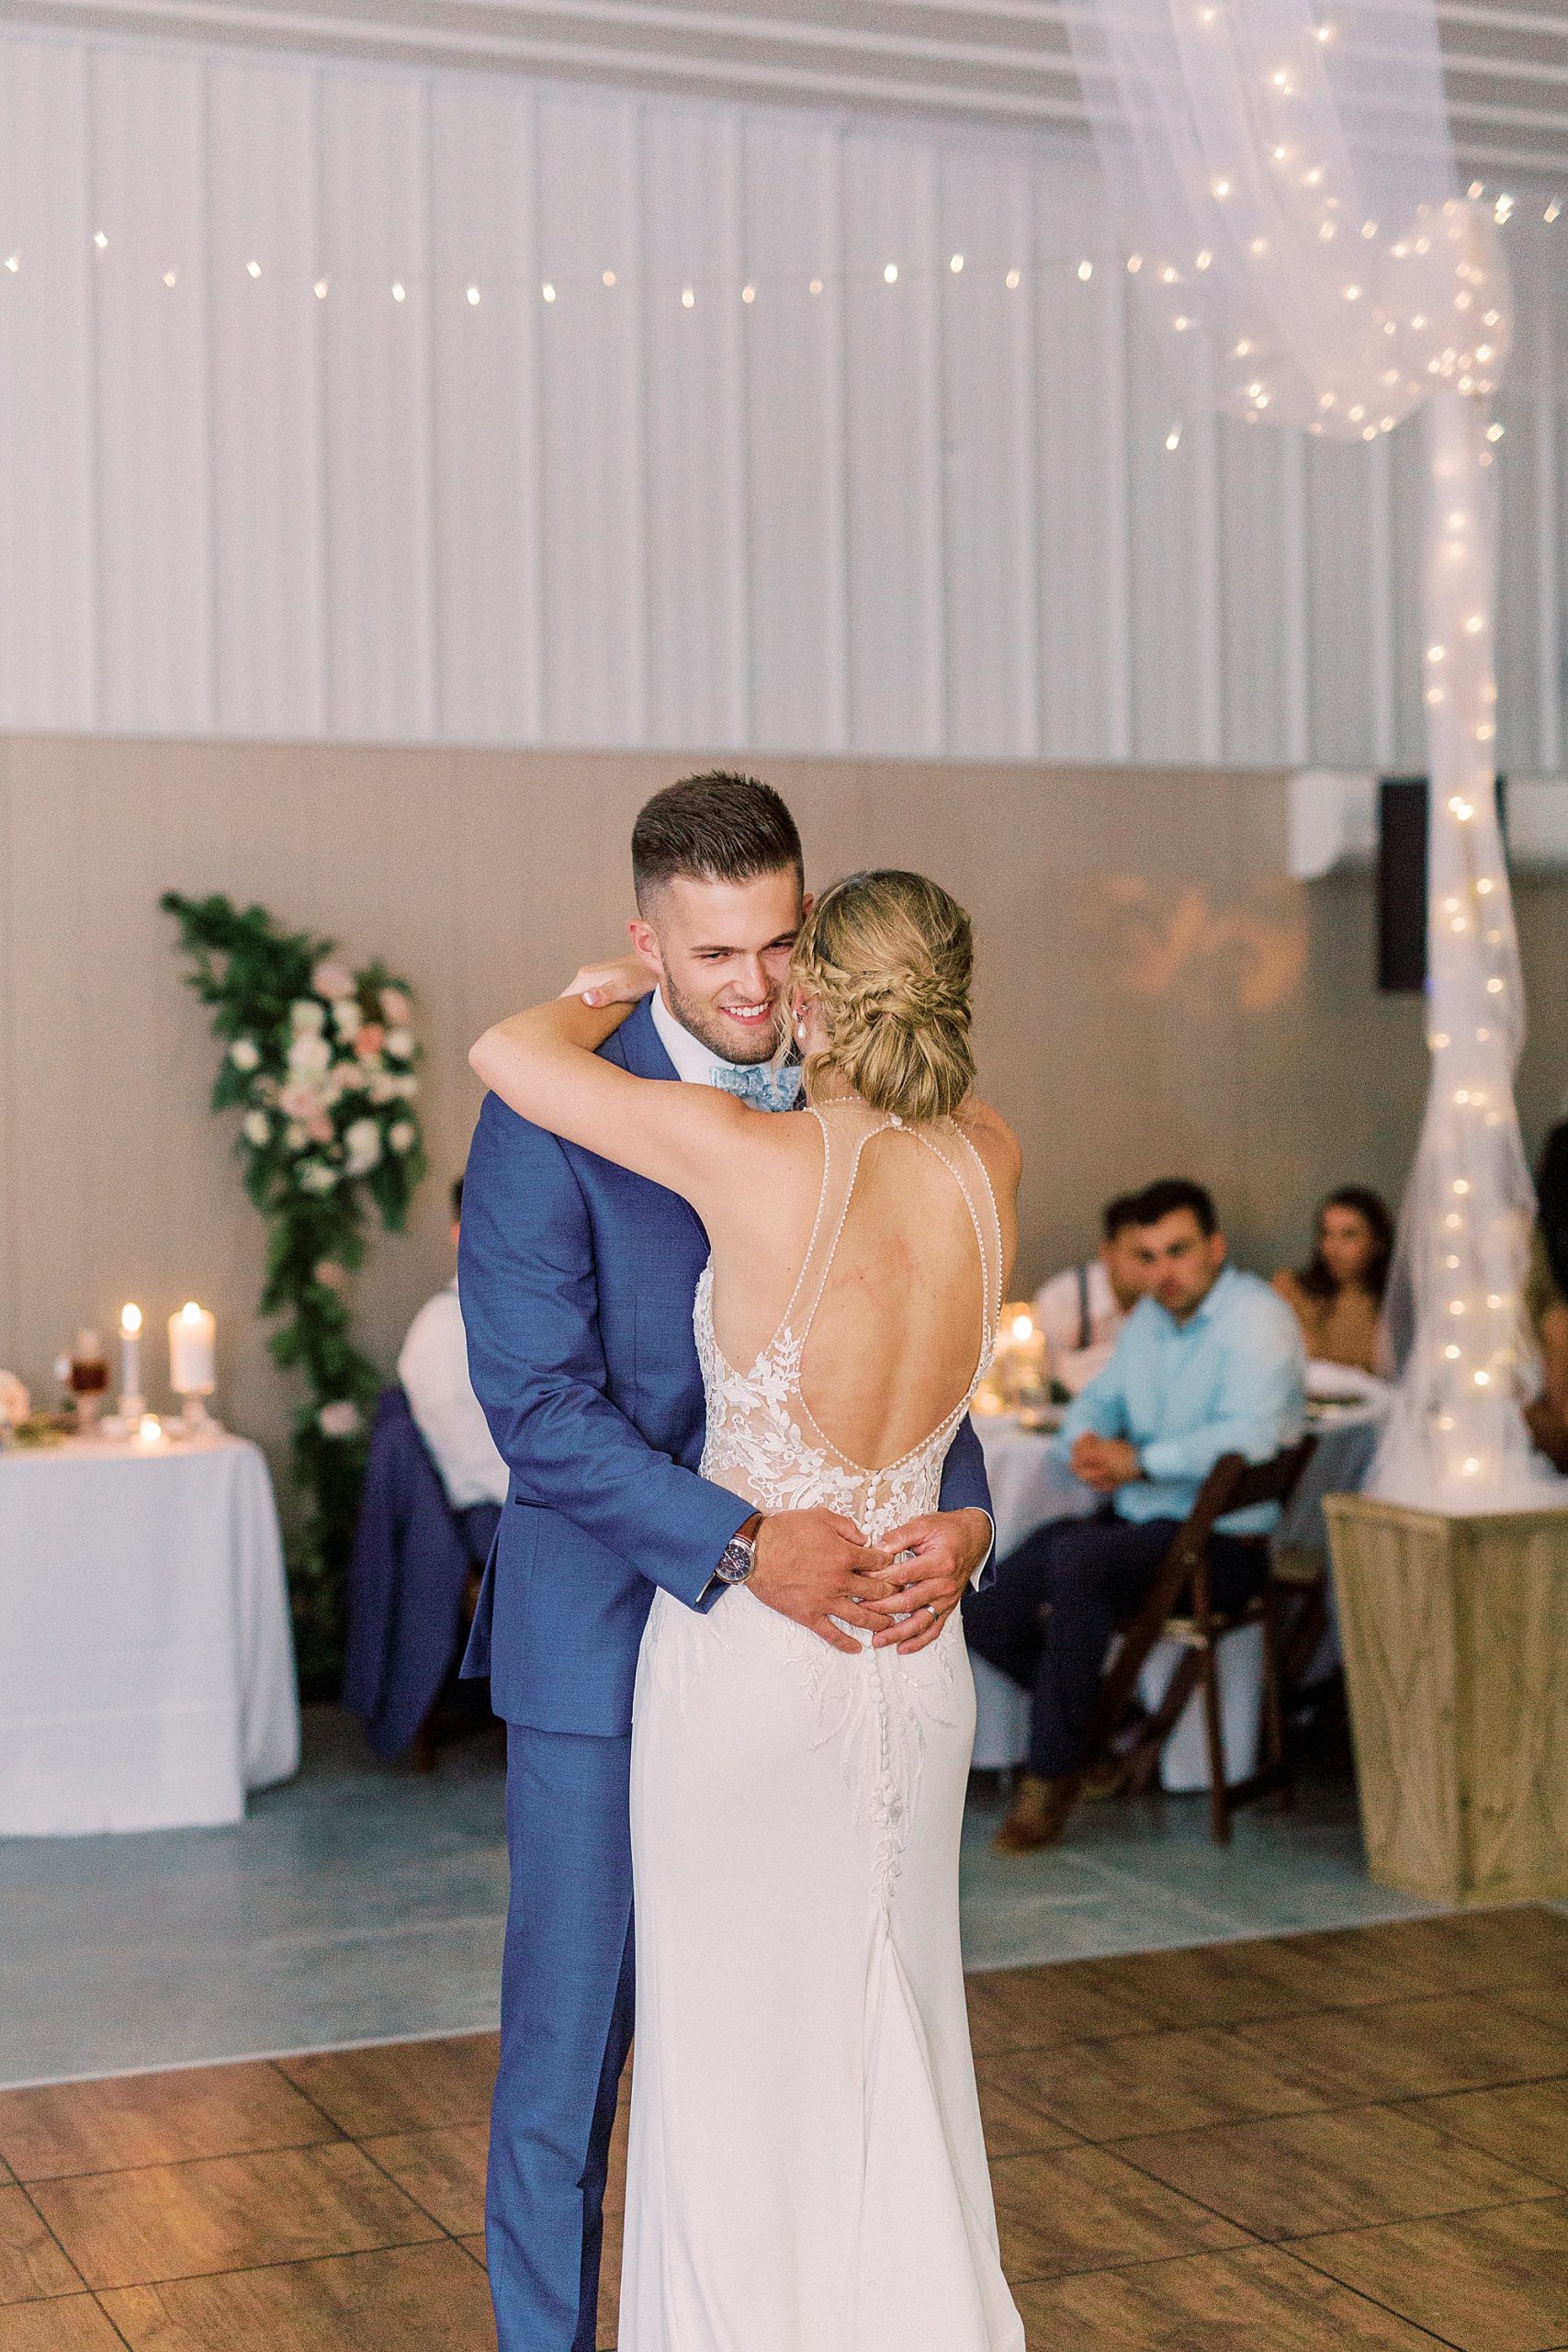 newlyweds have first dance in barn